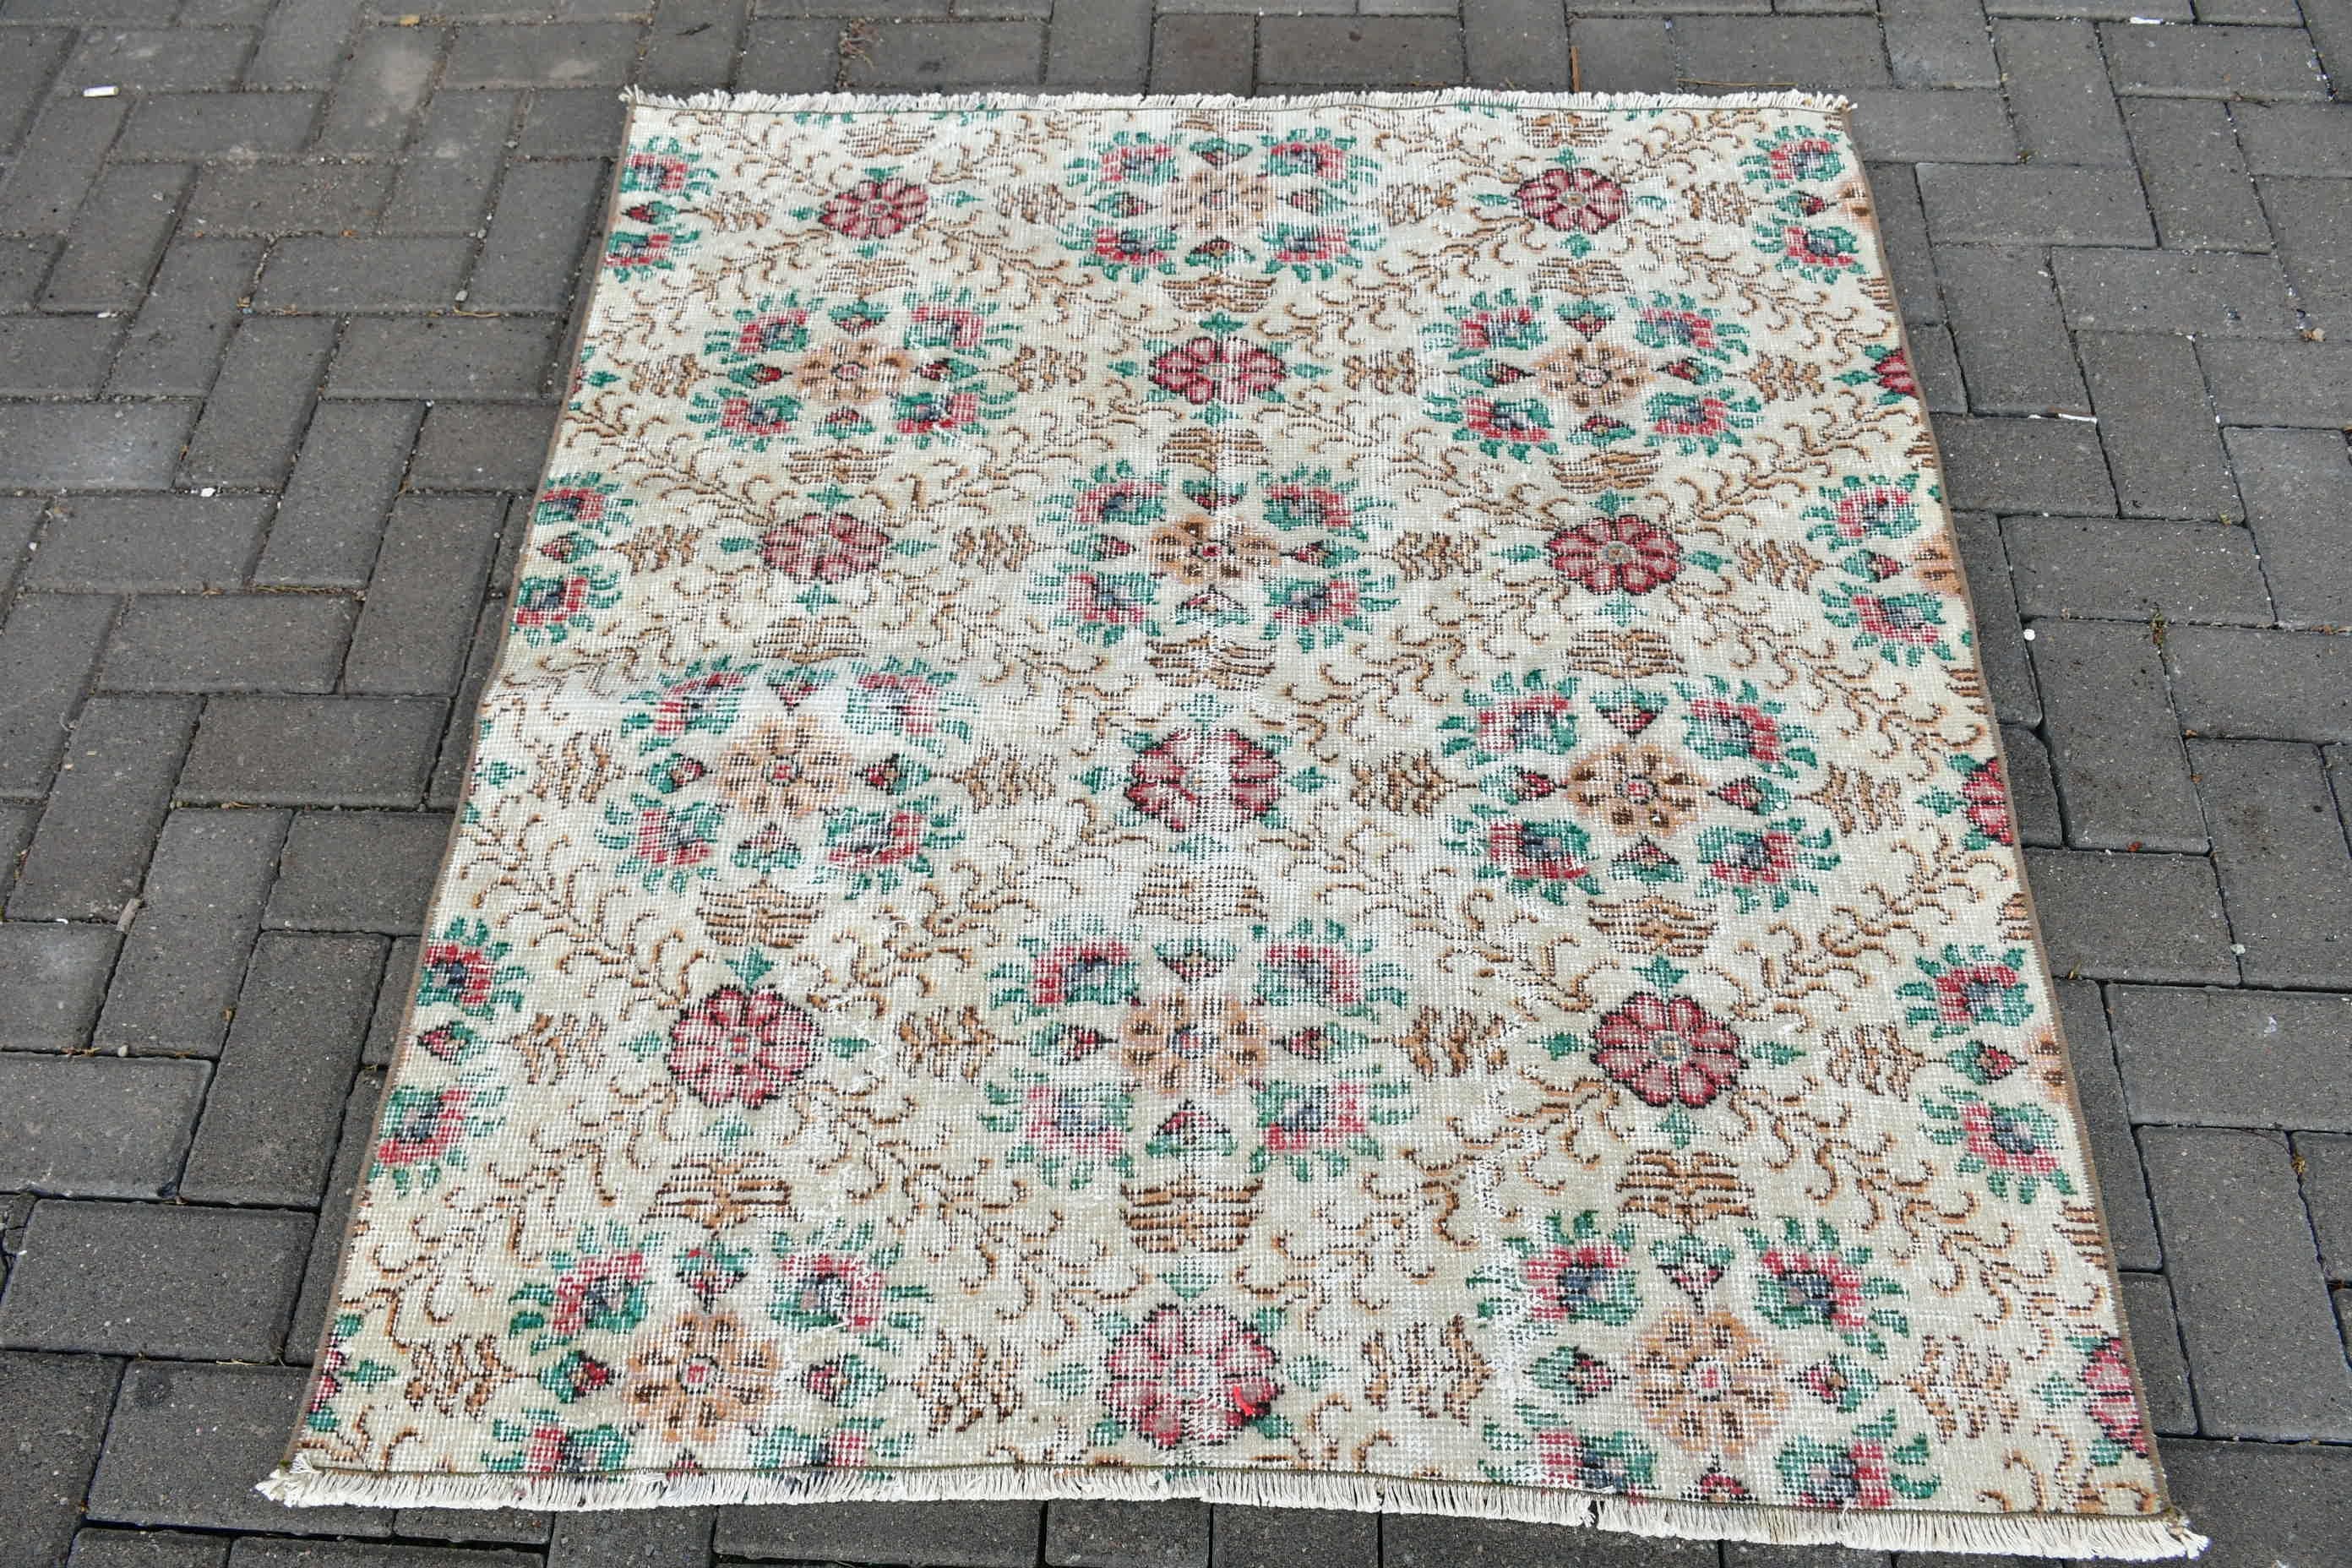 Beige Cool Rugs, Turkish Rugs, Vintage Rugs, 3.7x3.9 ft Small Rugs, Rugs for Wall Hanging, Bath Rug, Entry Rug, Oushak Rug